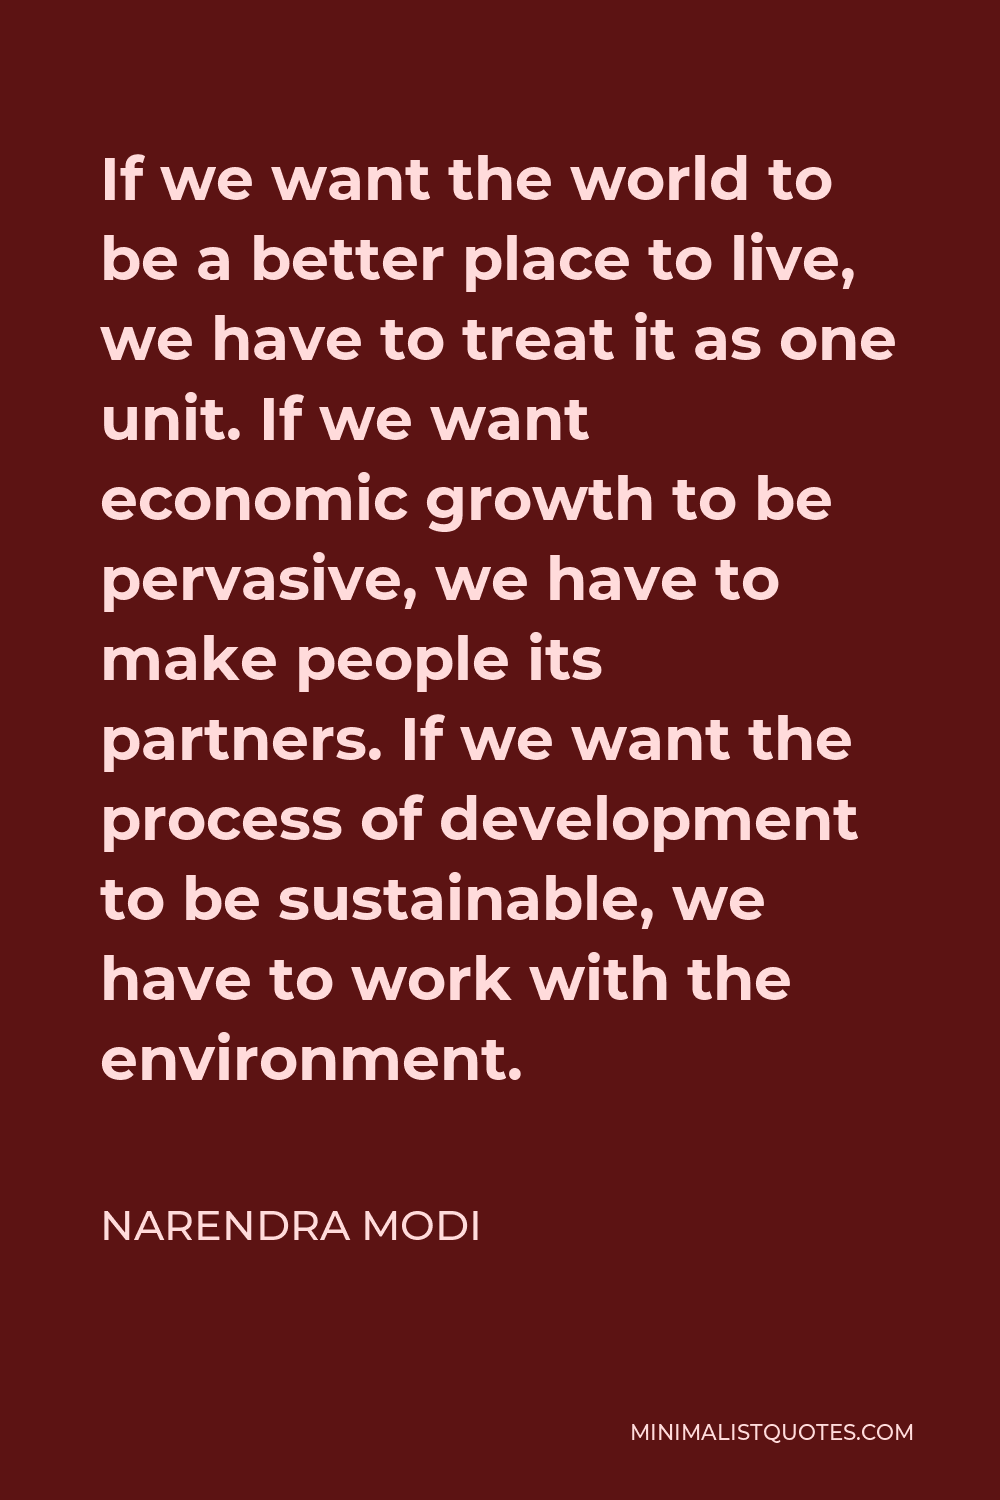 Narendra Modi Quote - If we want the world to be a better place to live, we have to treat it as one unit. If we want economic growth to be pervasive, we have to make people its partners. If we want the process of development to be sustainable, we have to work with the environment.